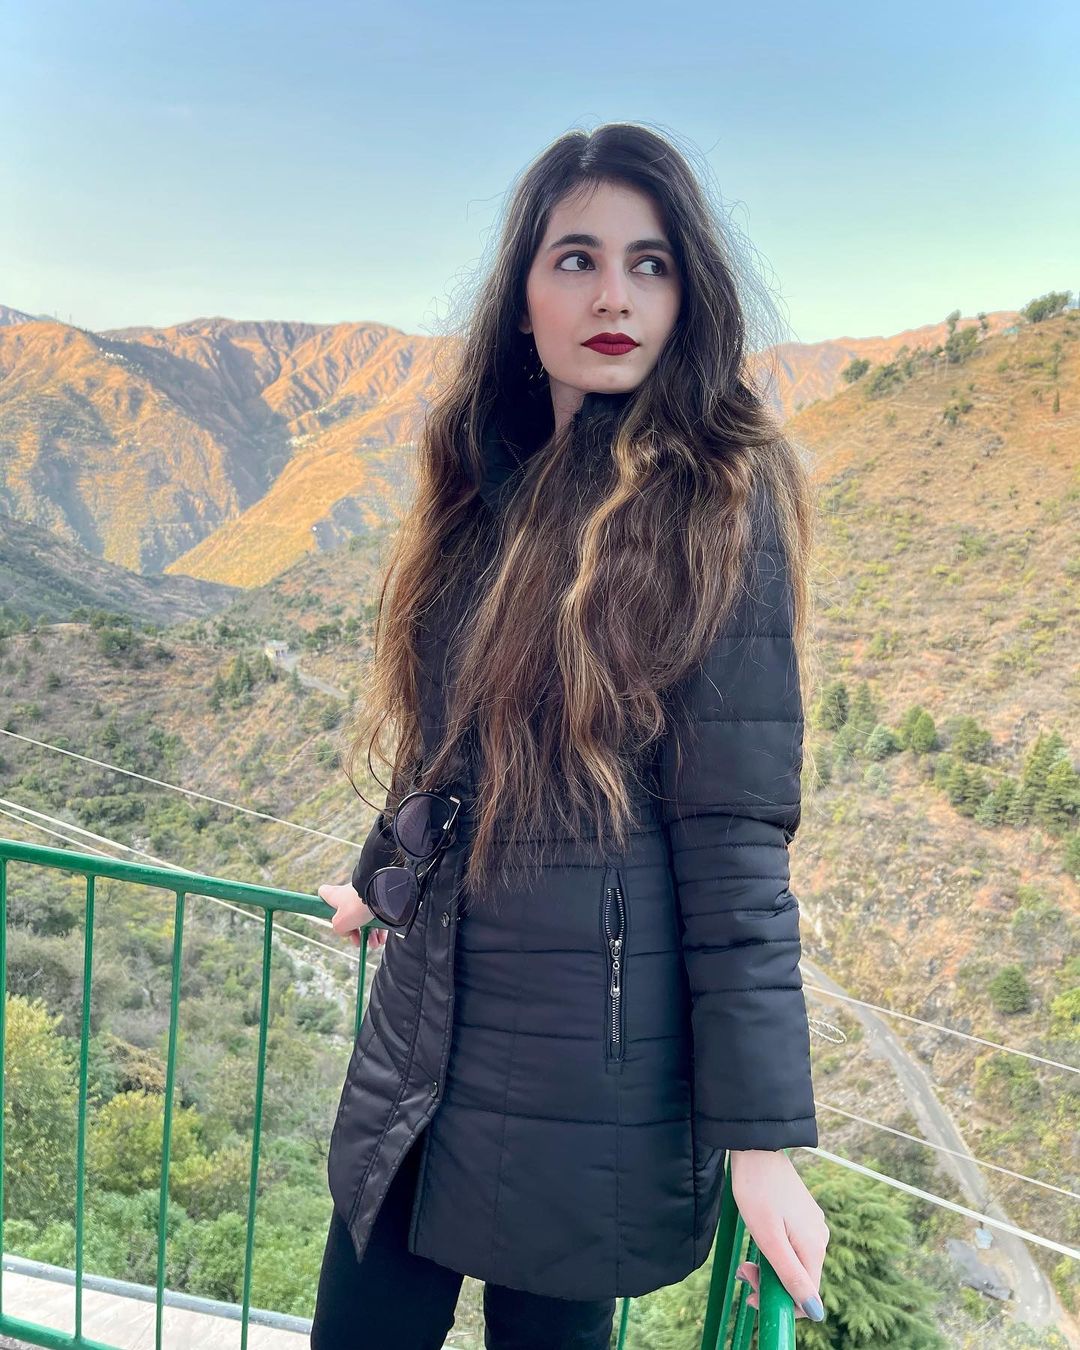 Monal Jagtani Instagram, Biography, Twitter, Success Story, Net Worth, Age, Family, Boyfriend, Career, Education, and Body Measurements